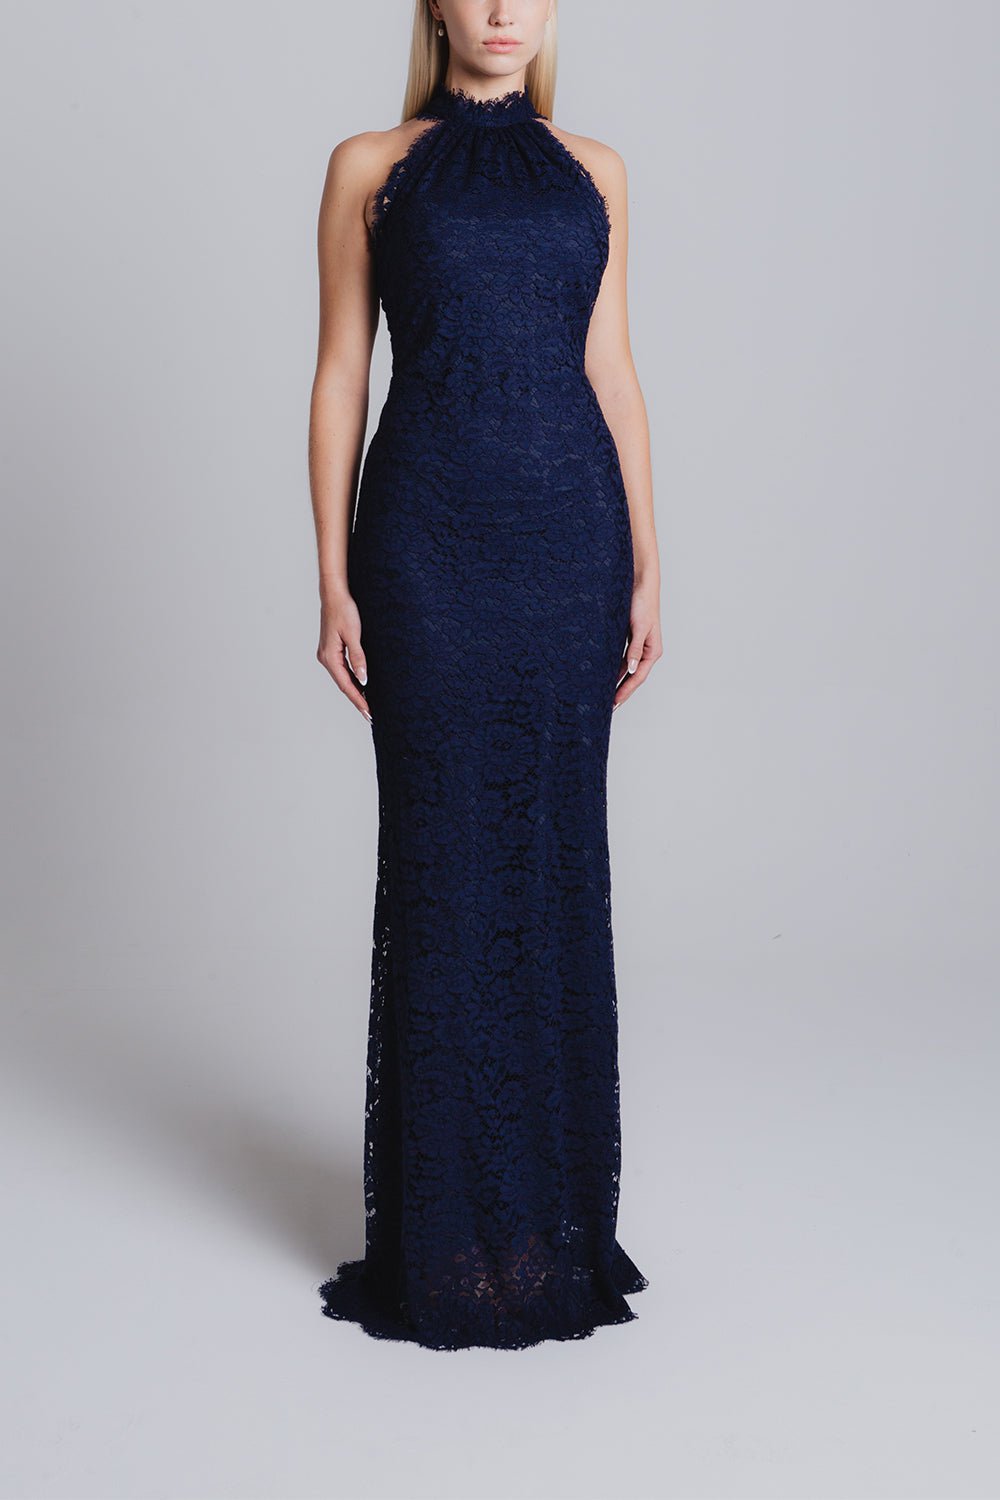 CATHERINE REGEHR-T Neck Lace Gown-NAVY